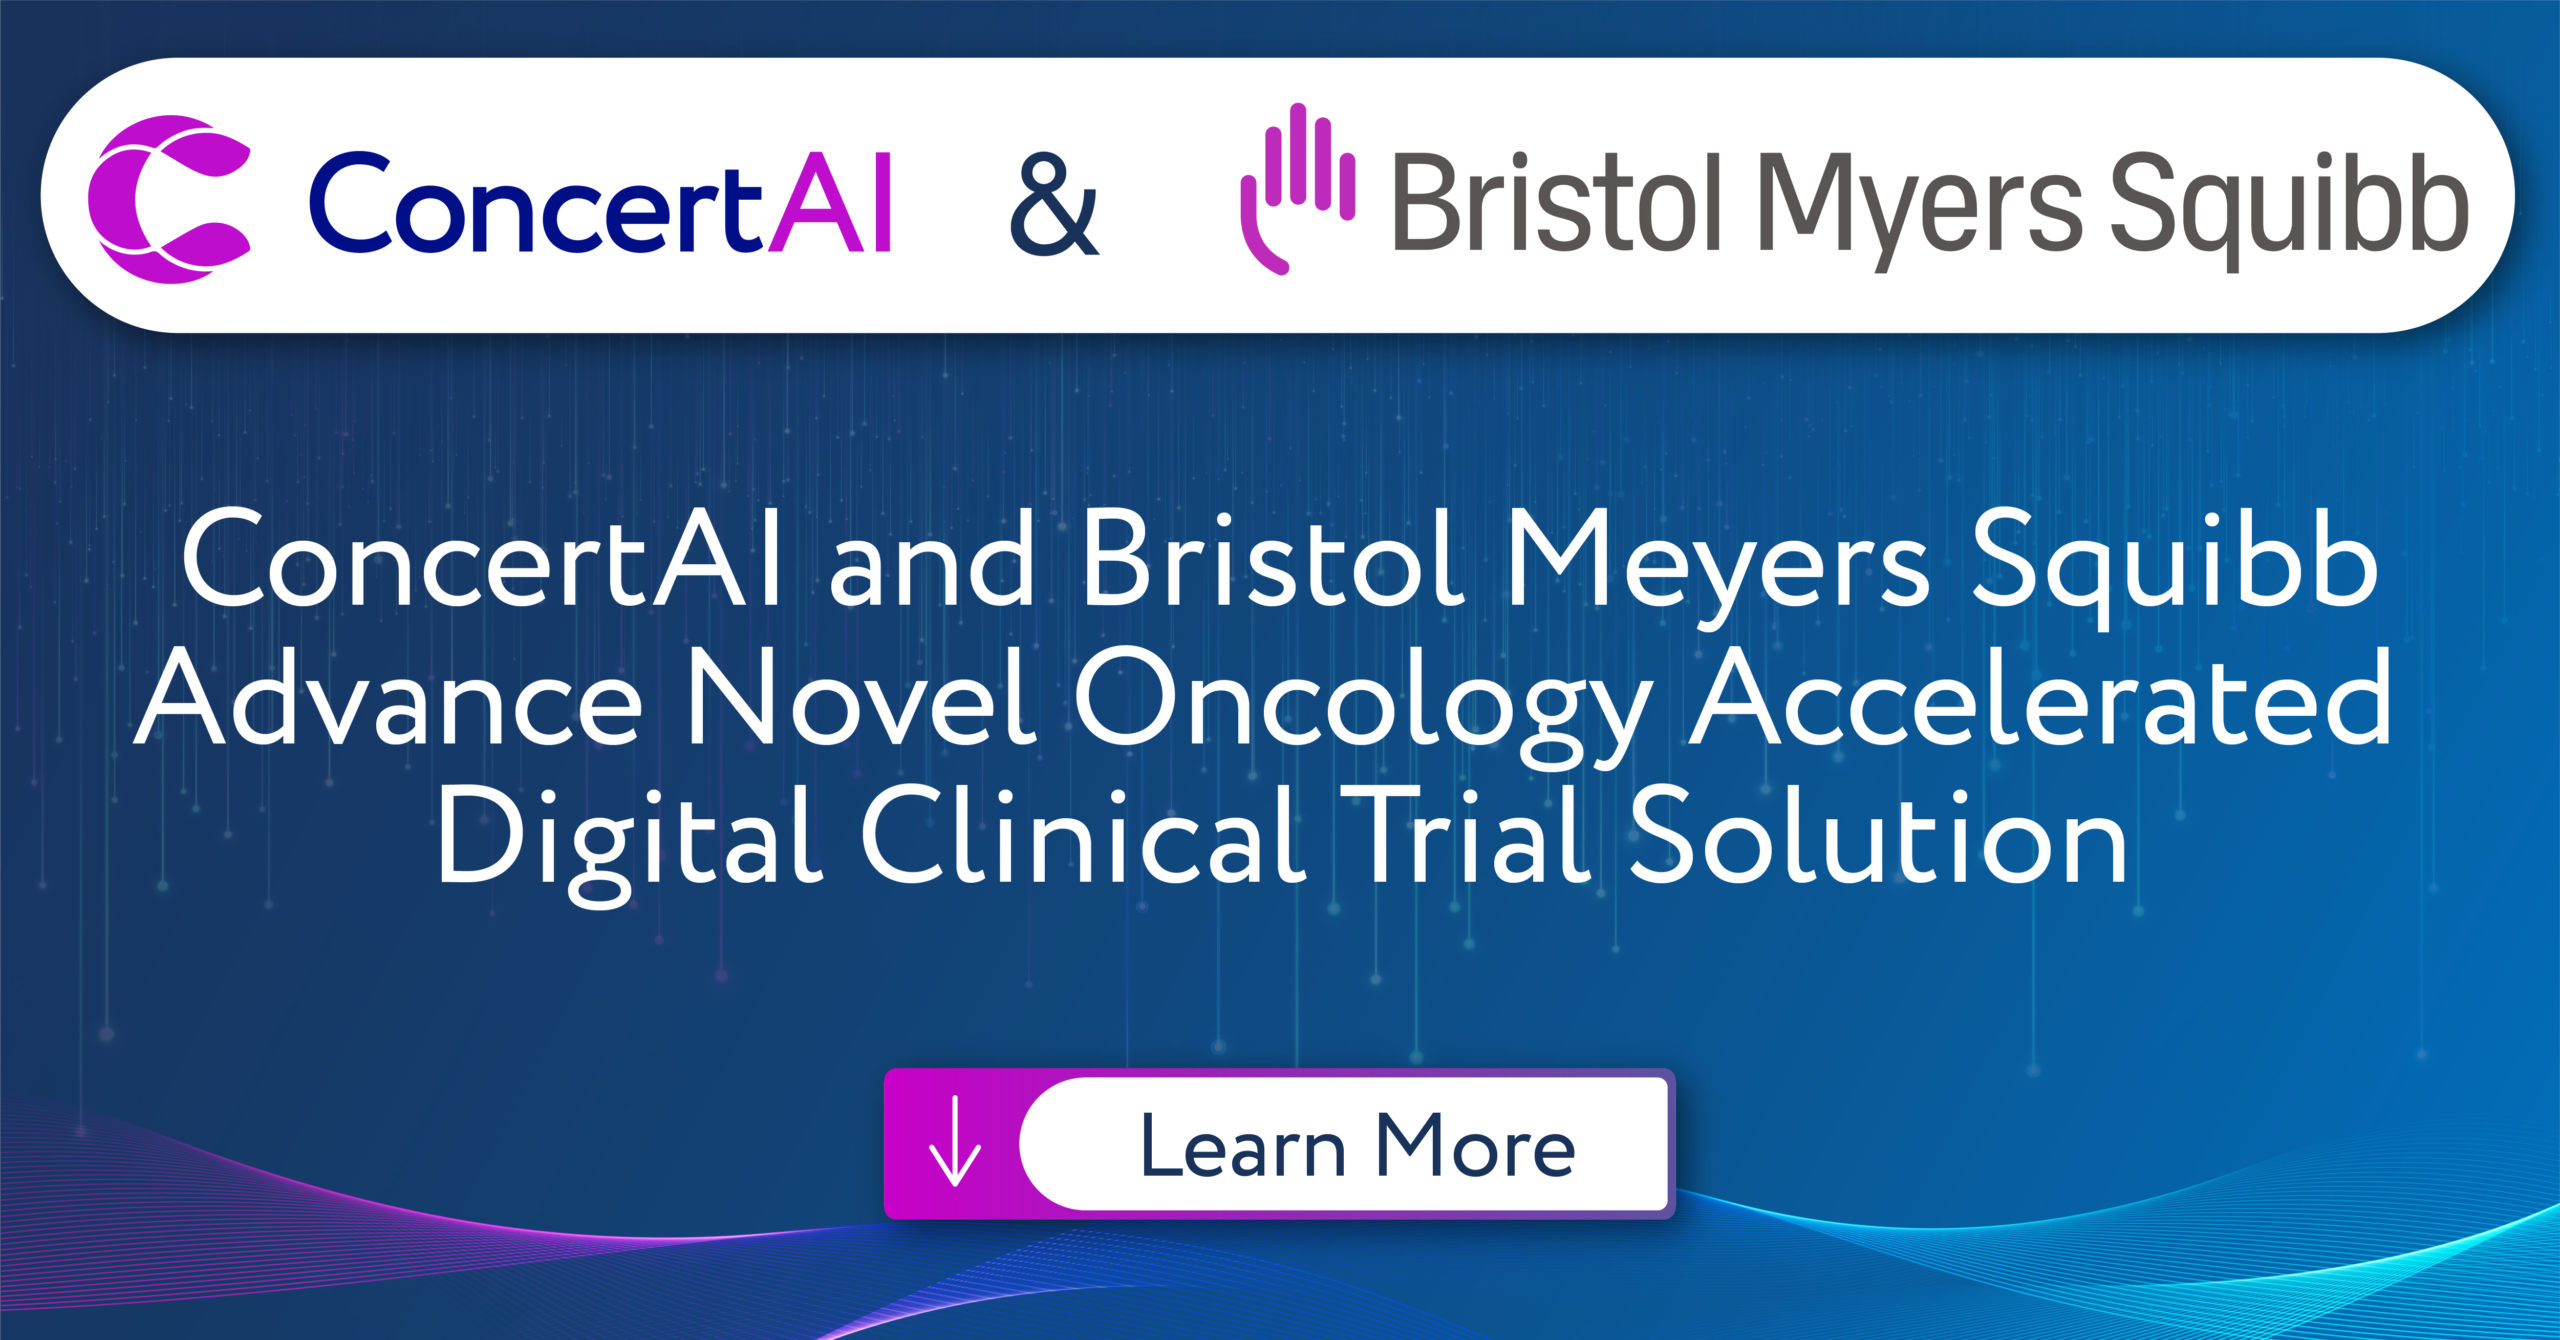 Bristol Myers Squibb and ConcertAI Advance Novel Oncology Accelerated Digital Clinical Trial Solution